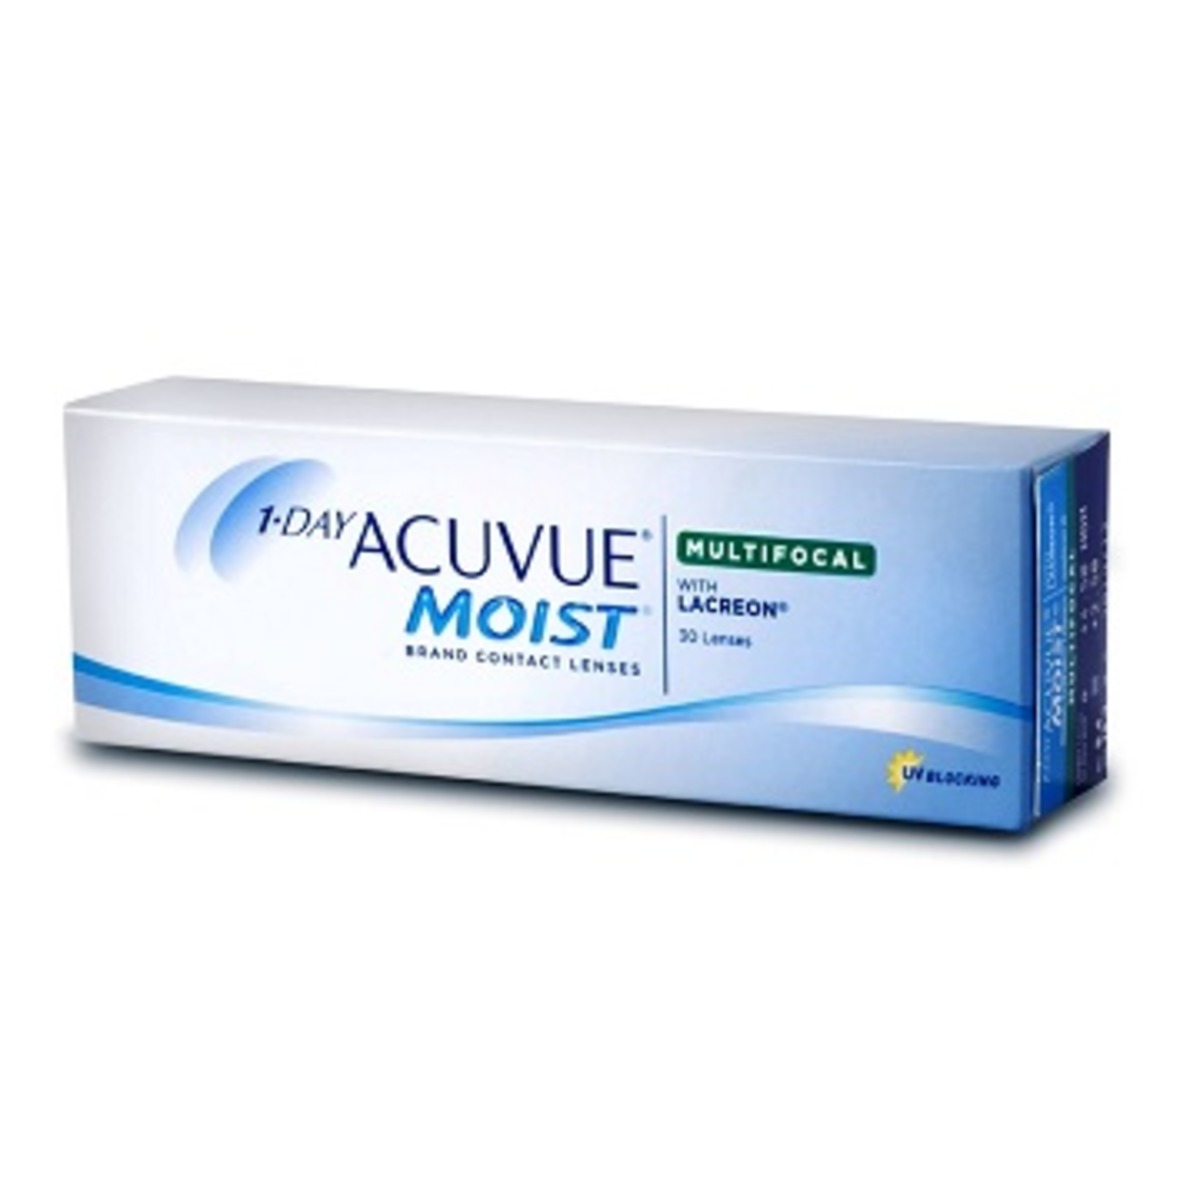 1 Day Acuvue Moist Multifocal 30L